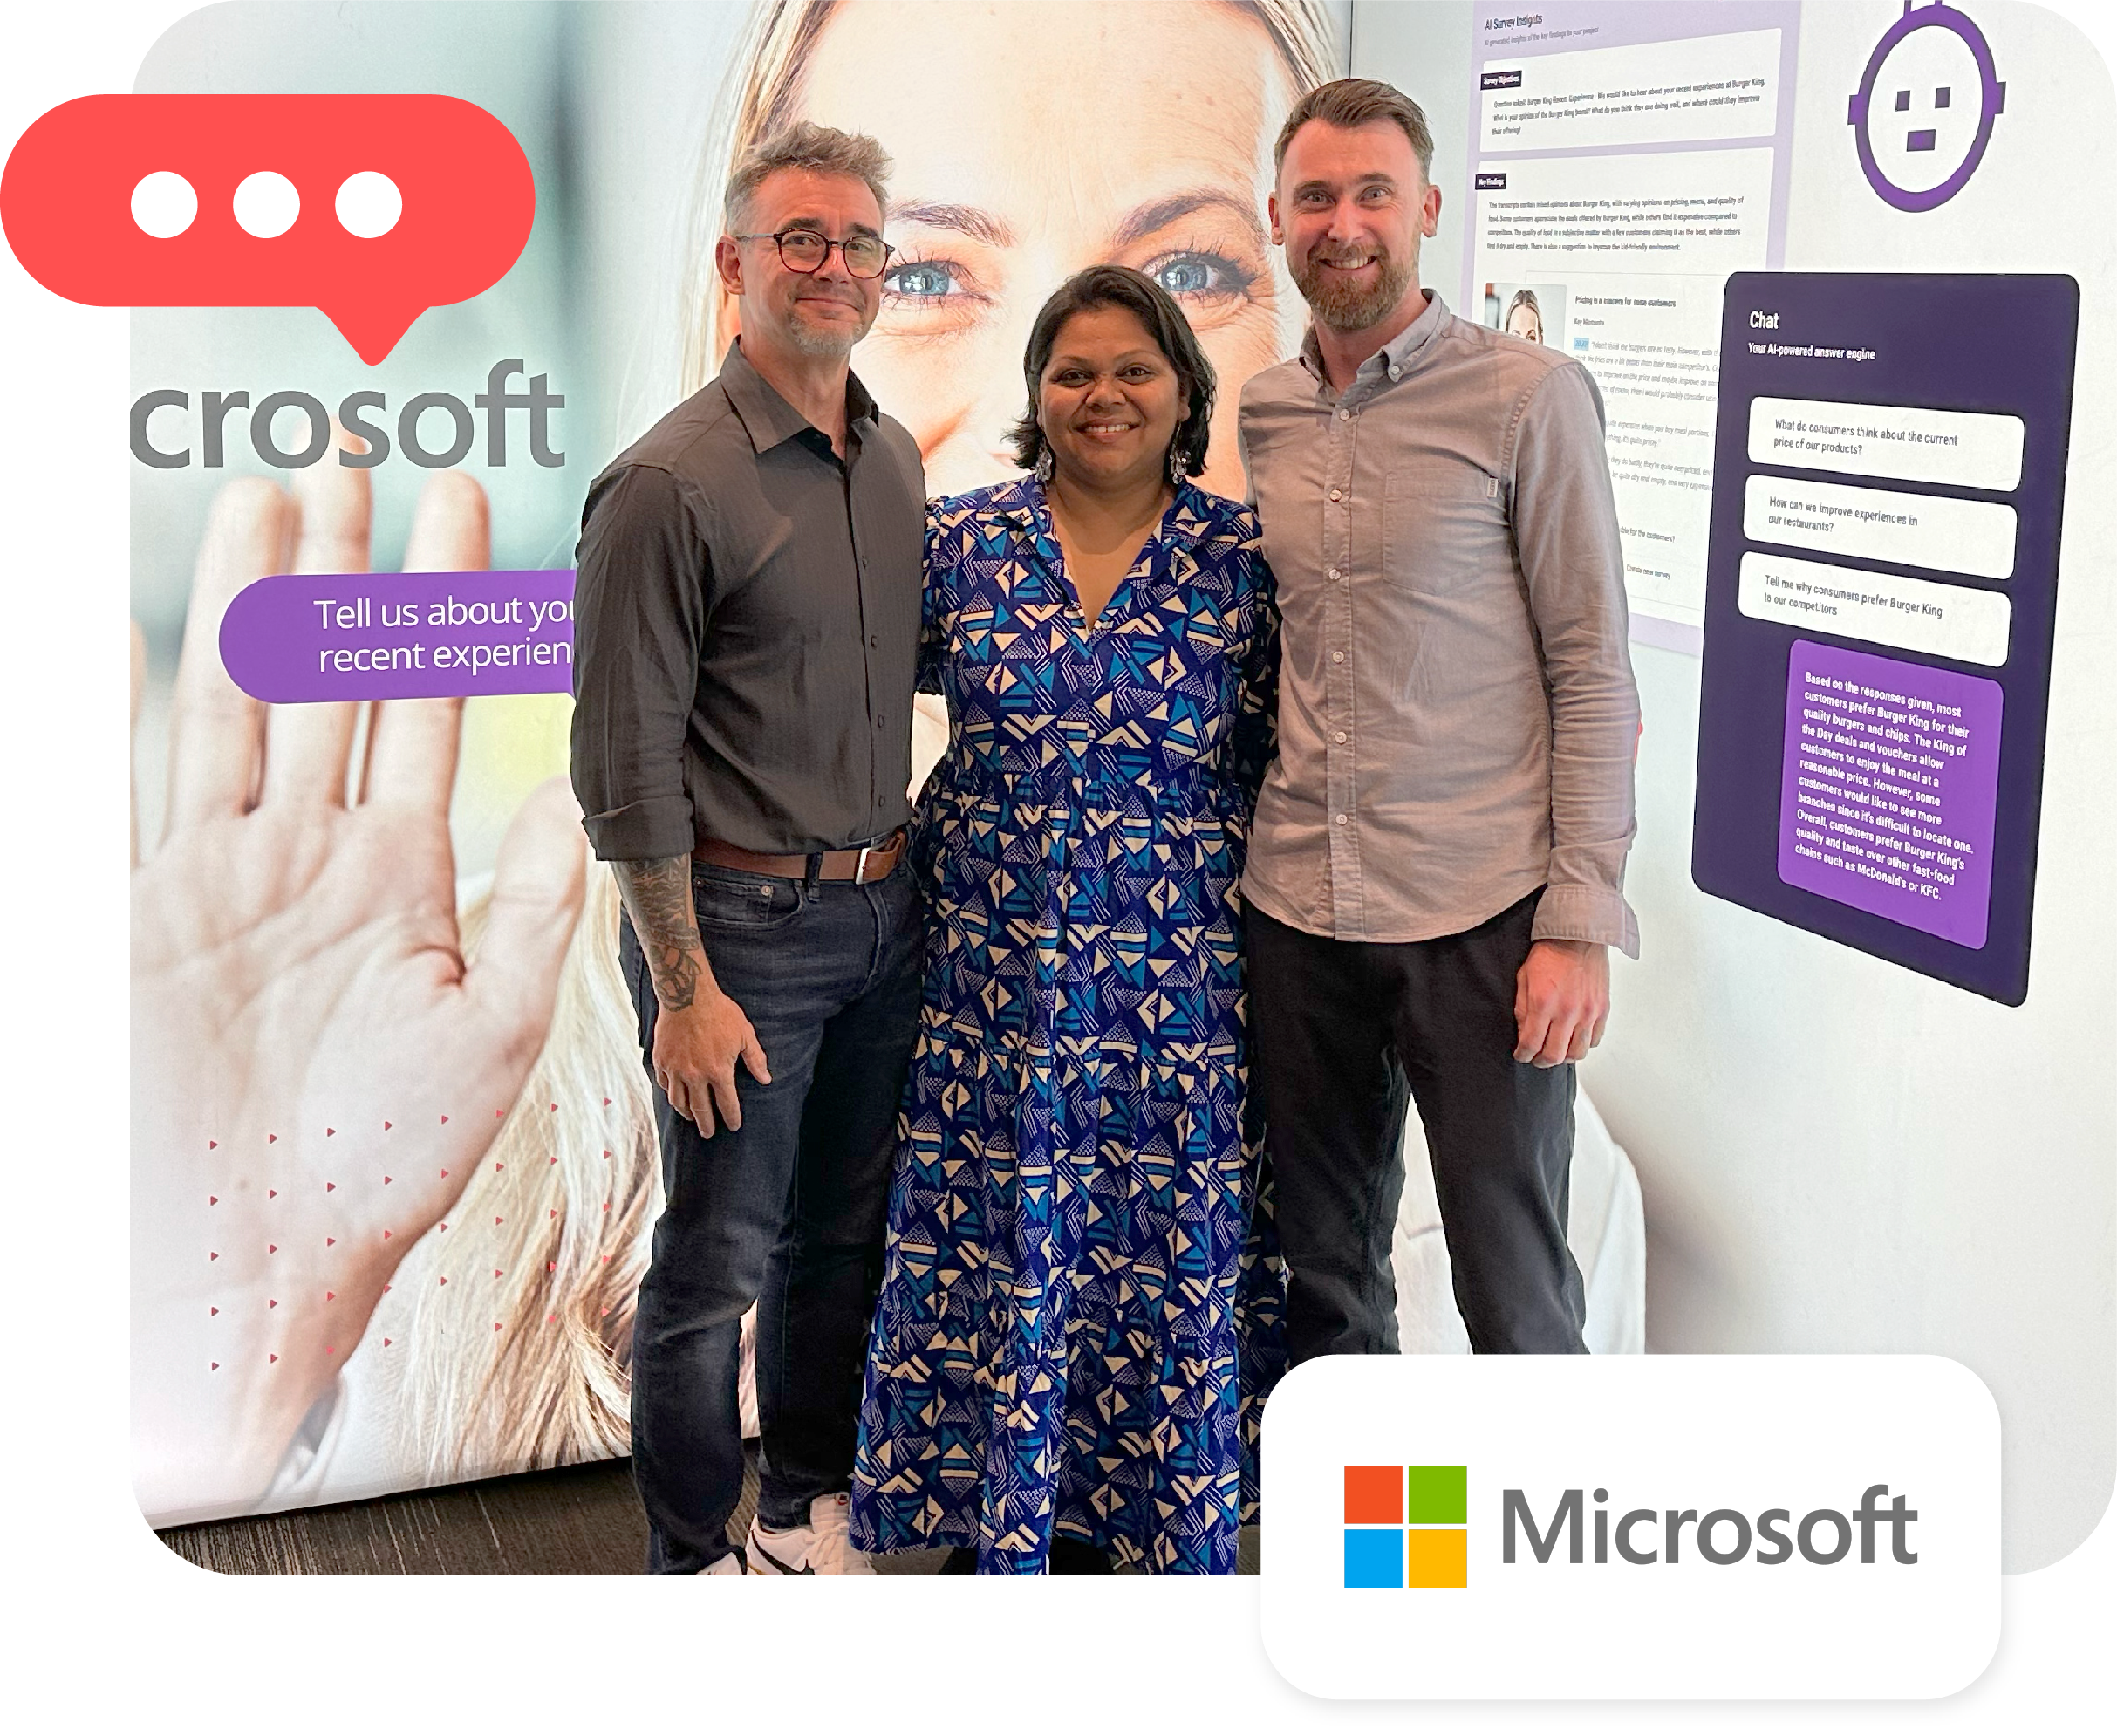 Three people standing in front of a Microsoft sign utilizing Voxpopme AI technology.